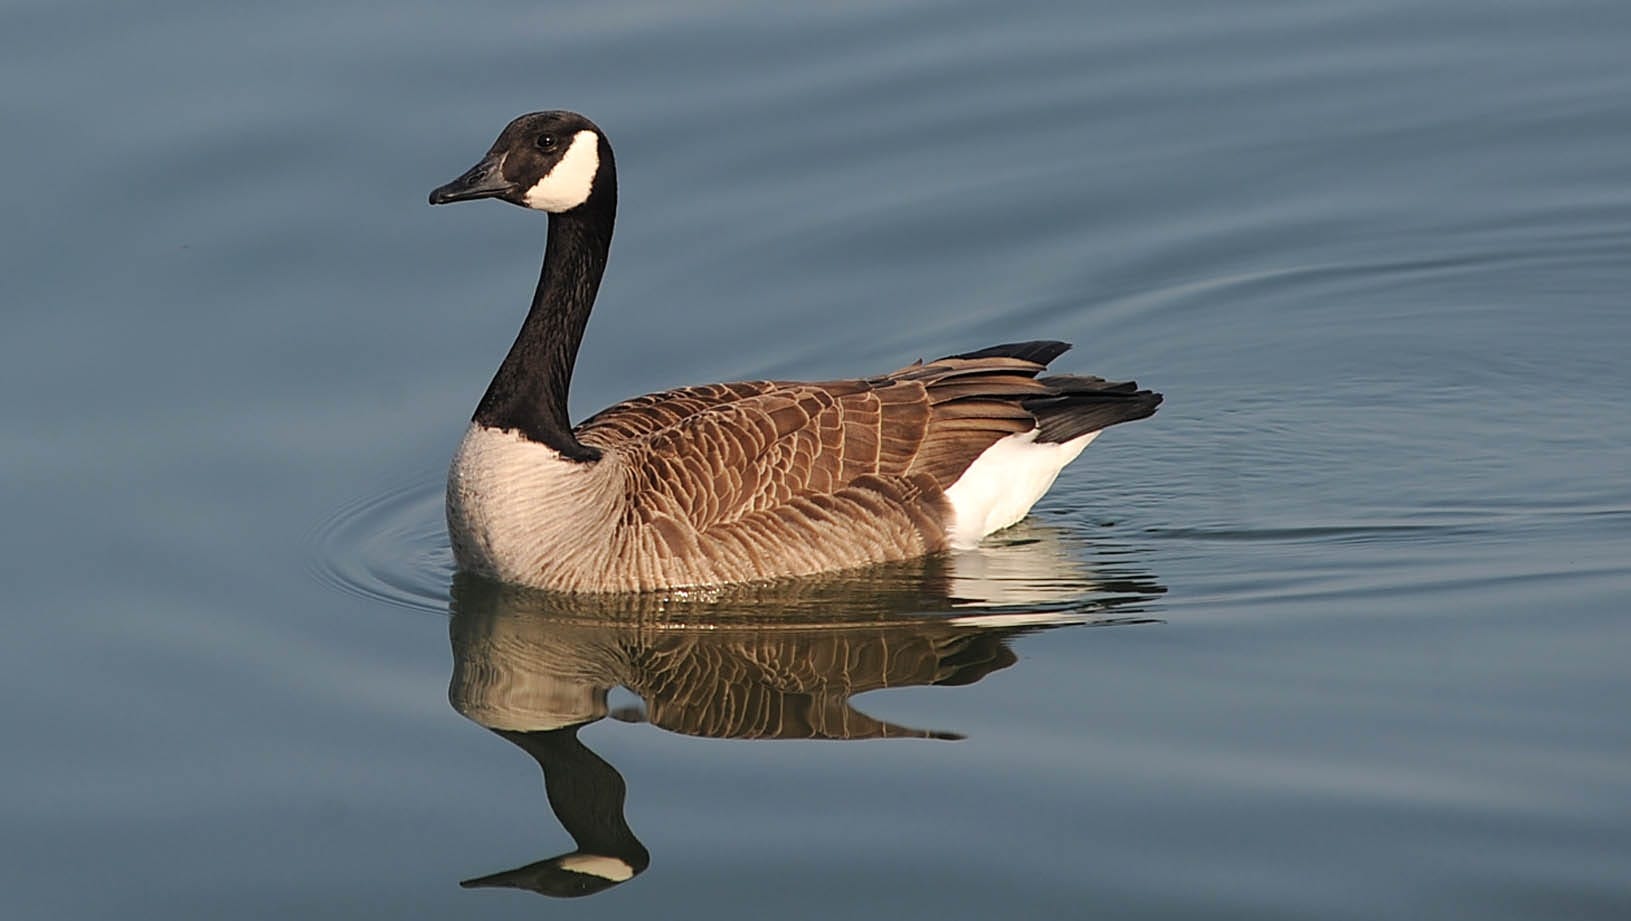 Pymatuning goose blind hunters have new application process